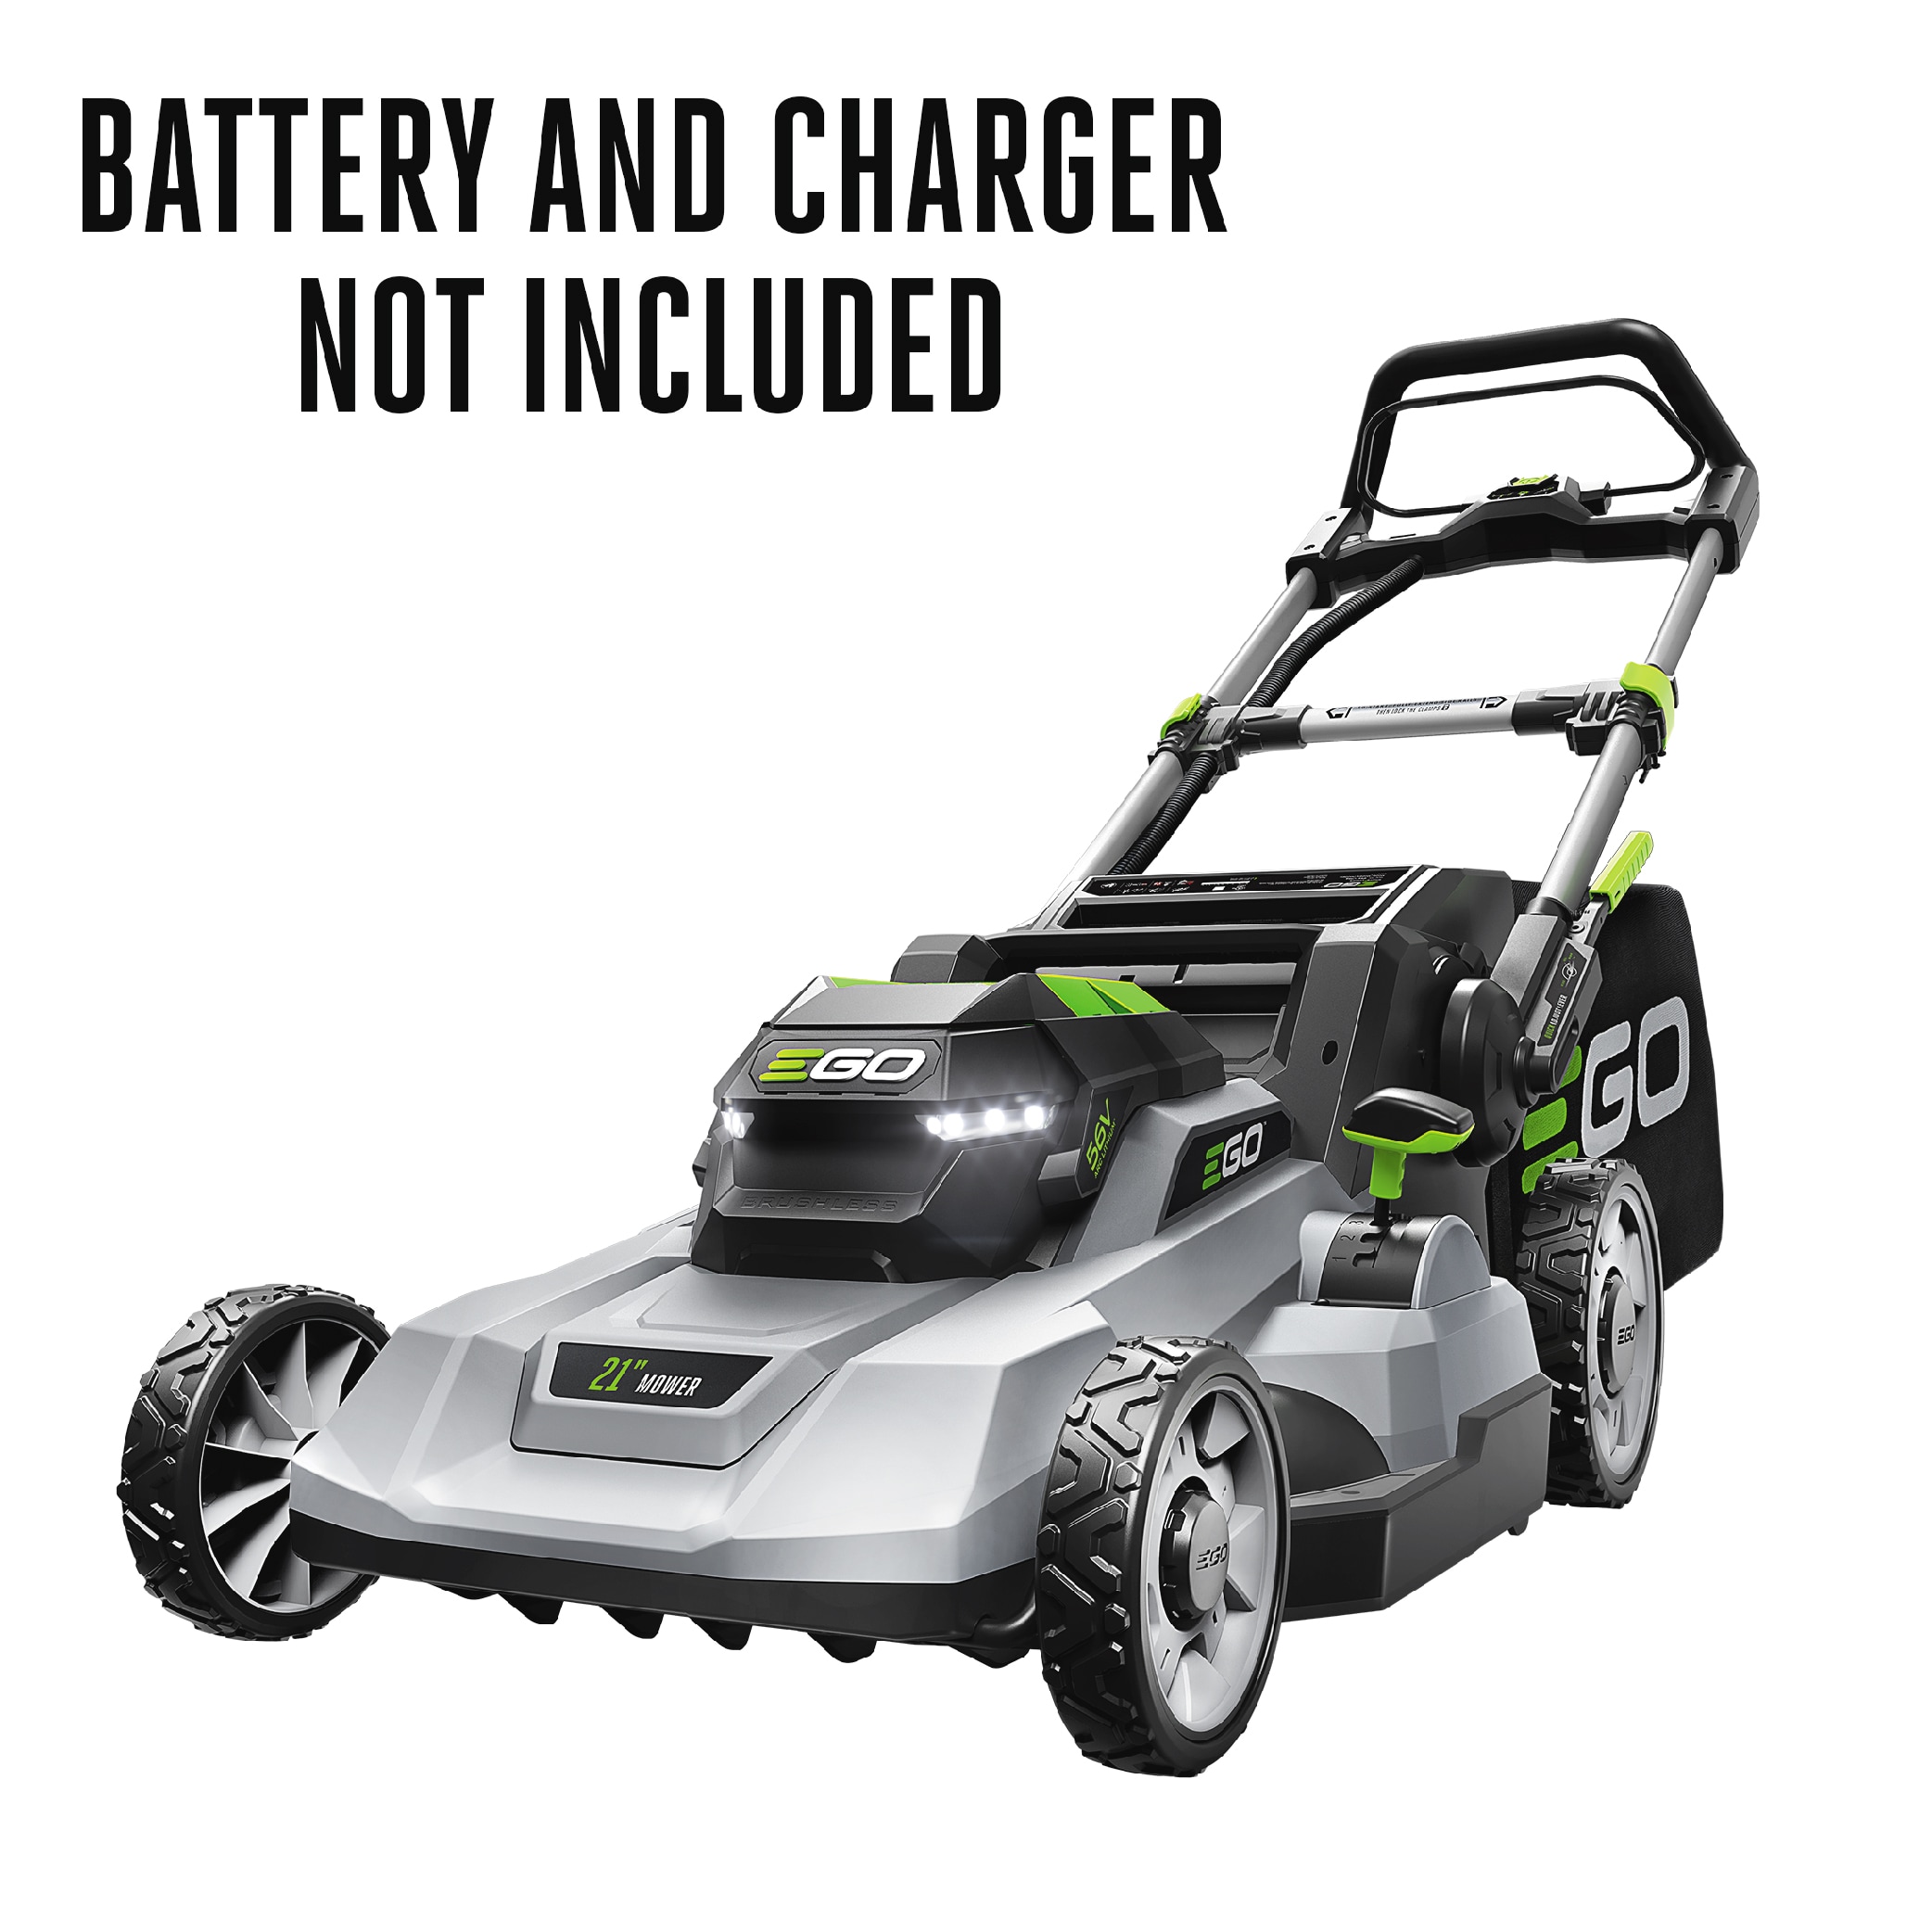 Lowe's Has One of Our Favorite Ego Electric Lawn Mowers for 30% Off